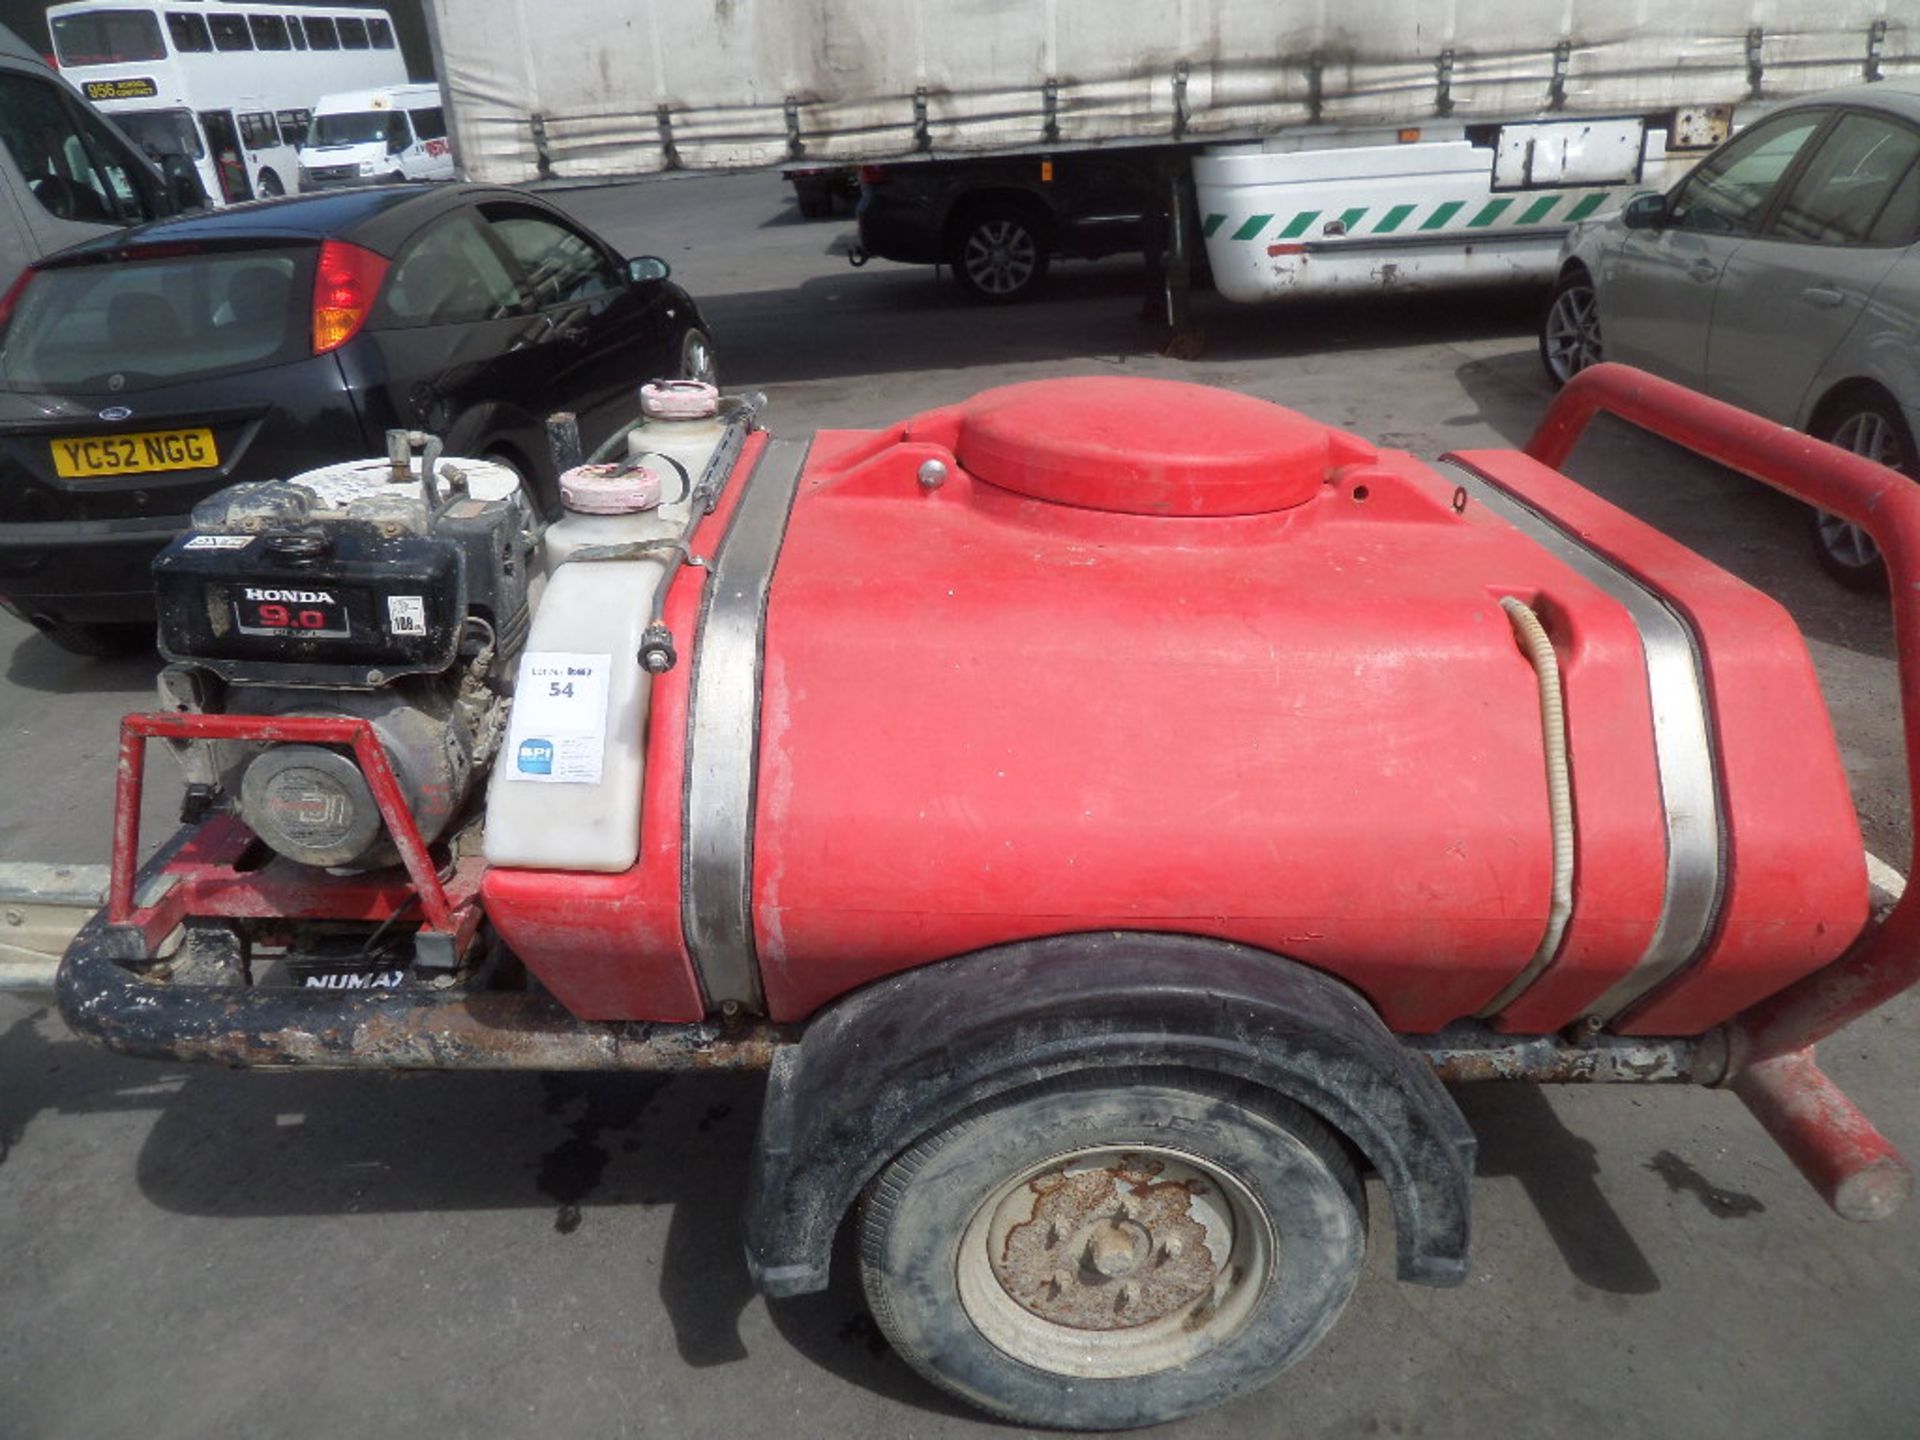 UNKNOWN  {026720} DIESEL PRESSURE WASHER AND BOWSER - TOWABLE Powered by Honda GD410 engine - starts - Image 2 of 7